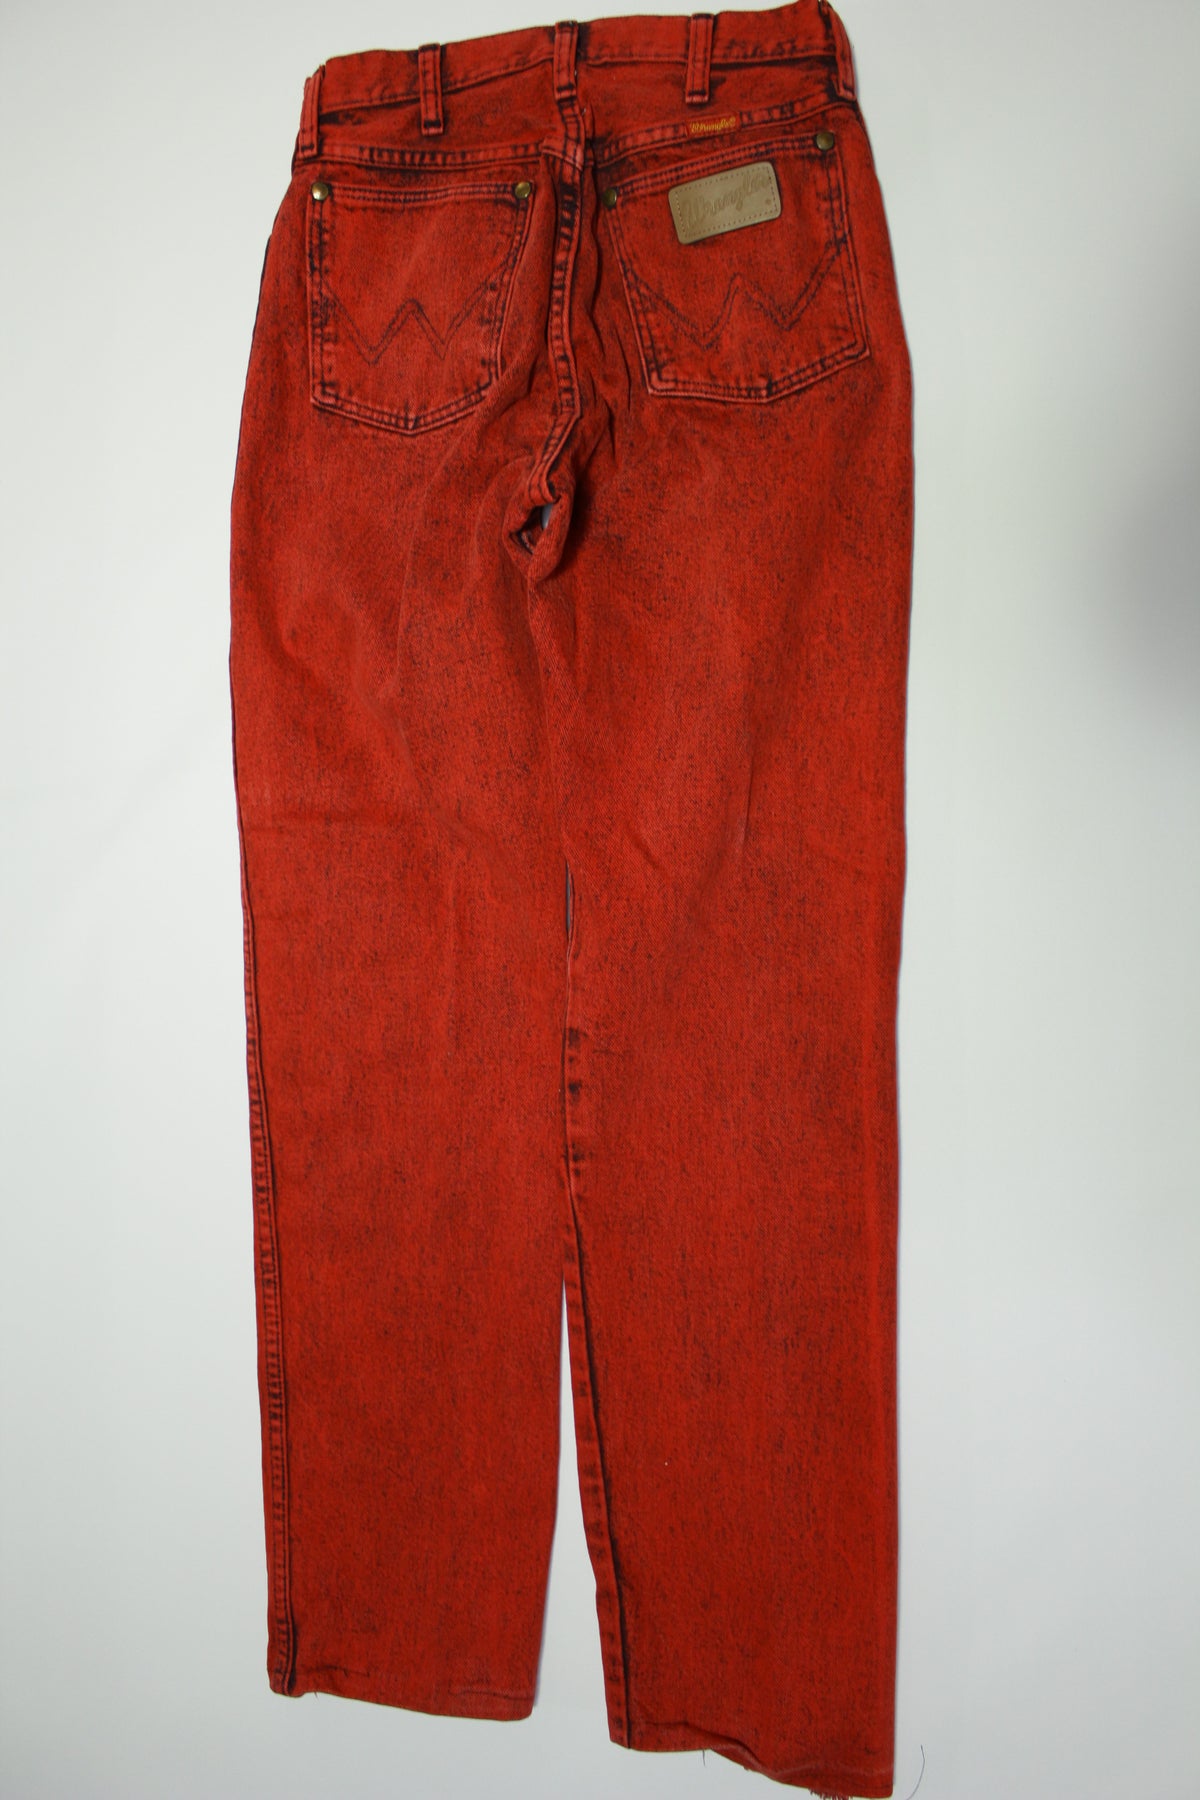 Wrangler Vintage 80's Red Over Dye 14MWZRE Rodeo Cowboy Jeans